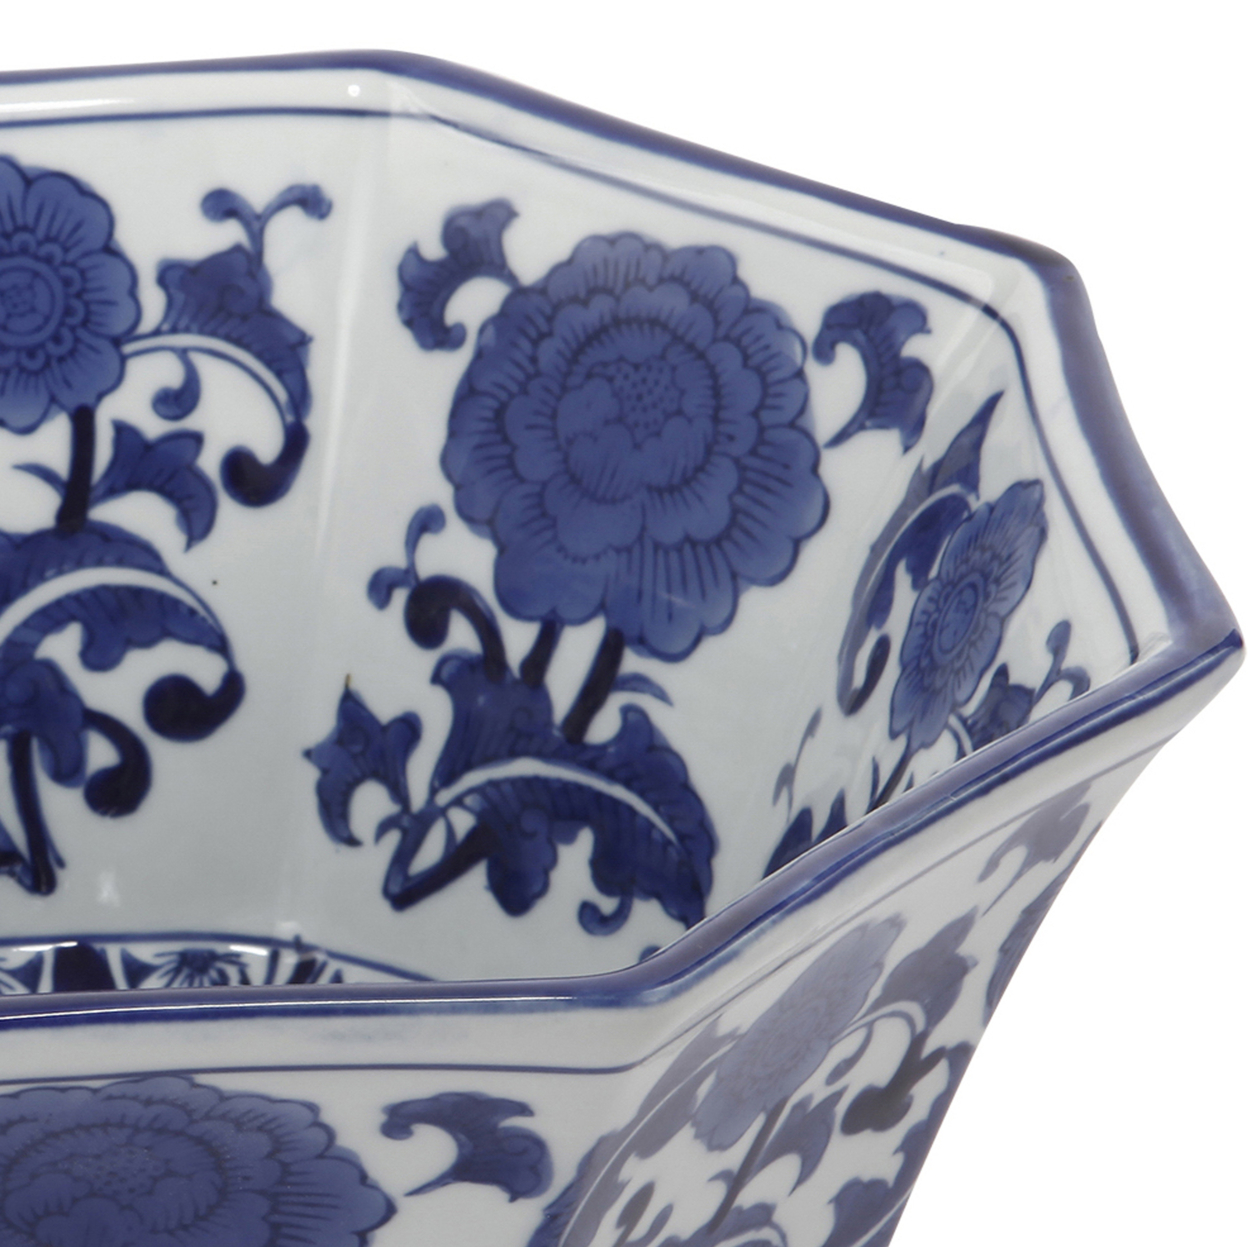 11 Inch Decorative Bowl With Floral Pattern On Blue And White Porcelain- Saltoro Sherpi